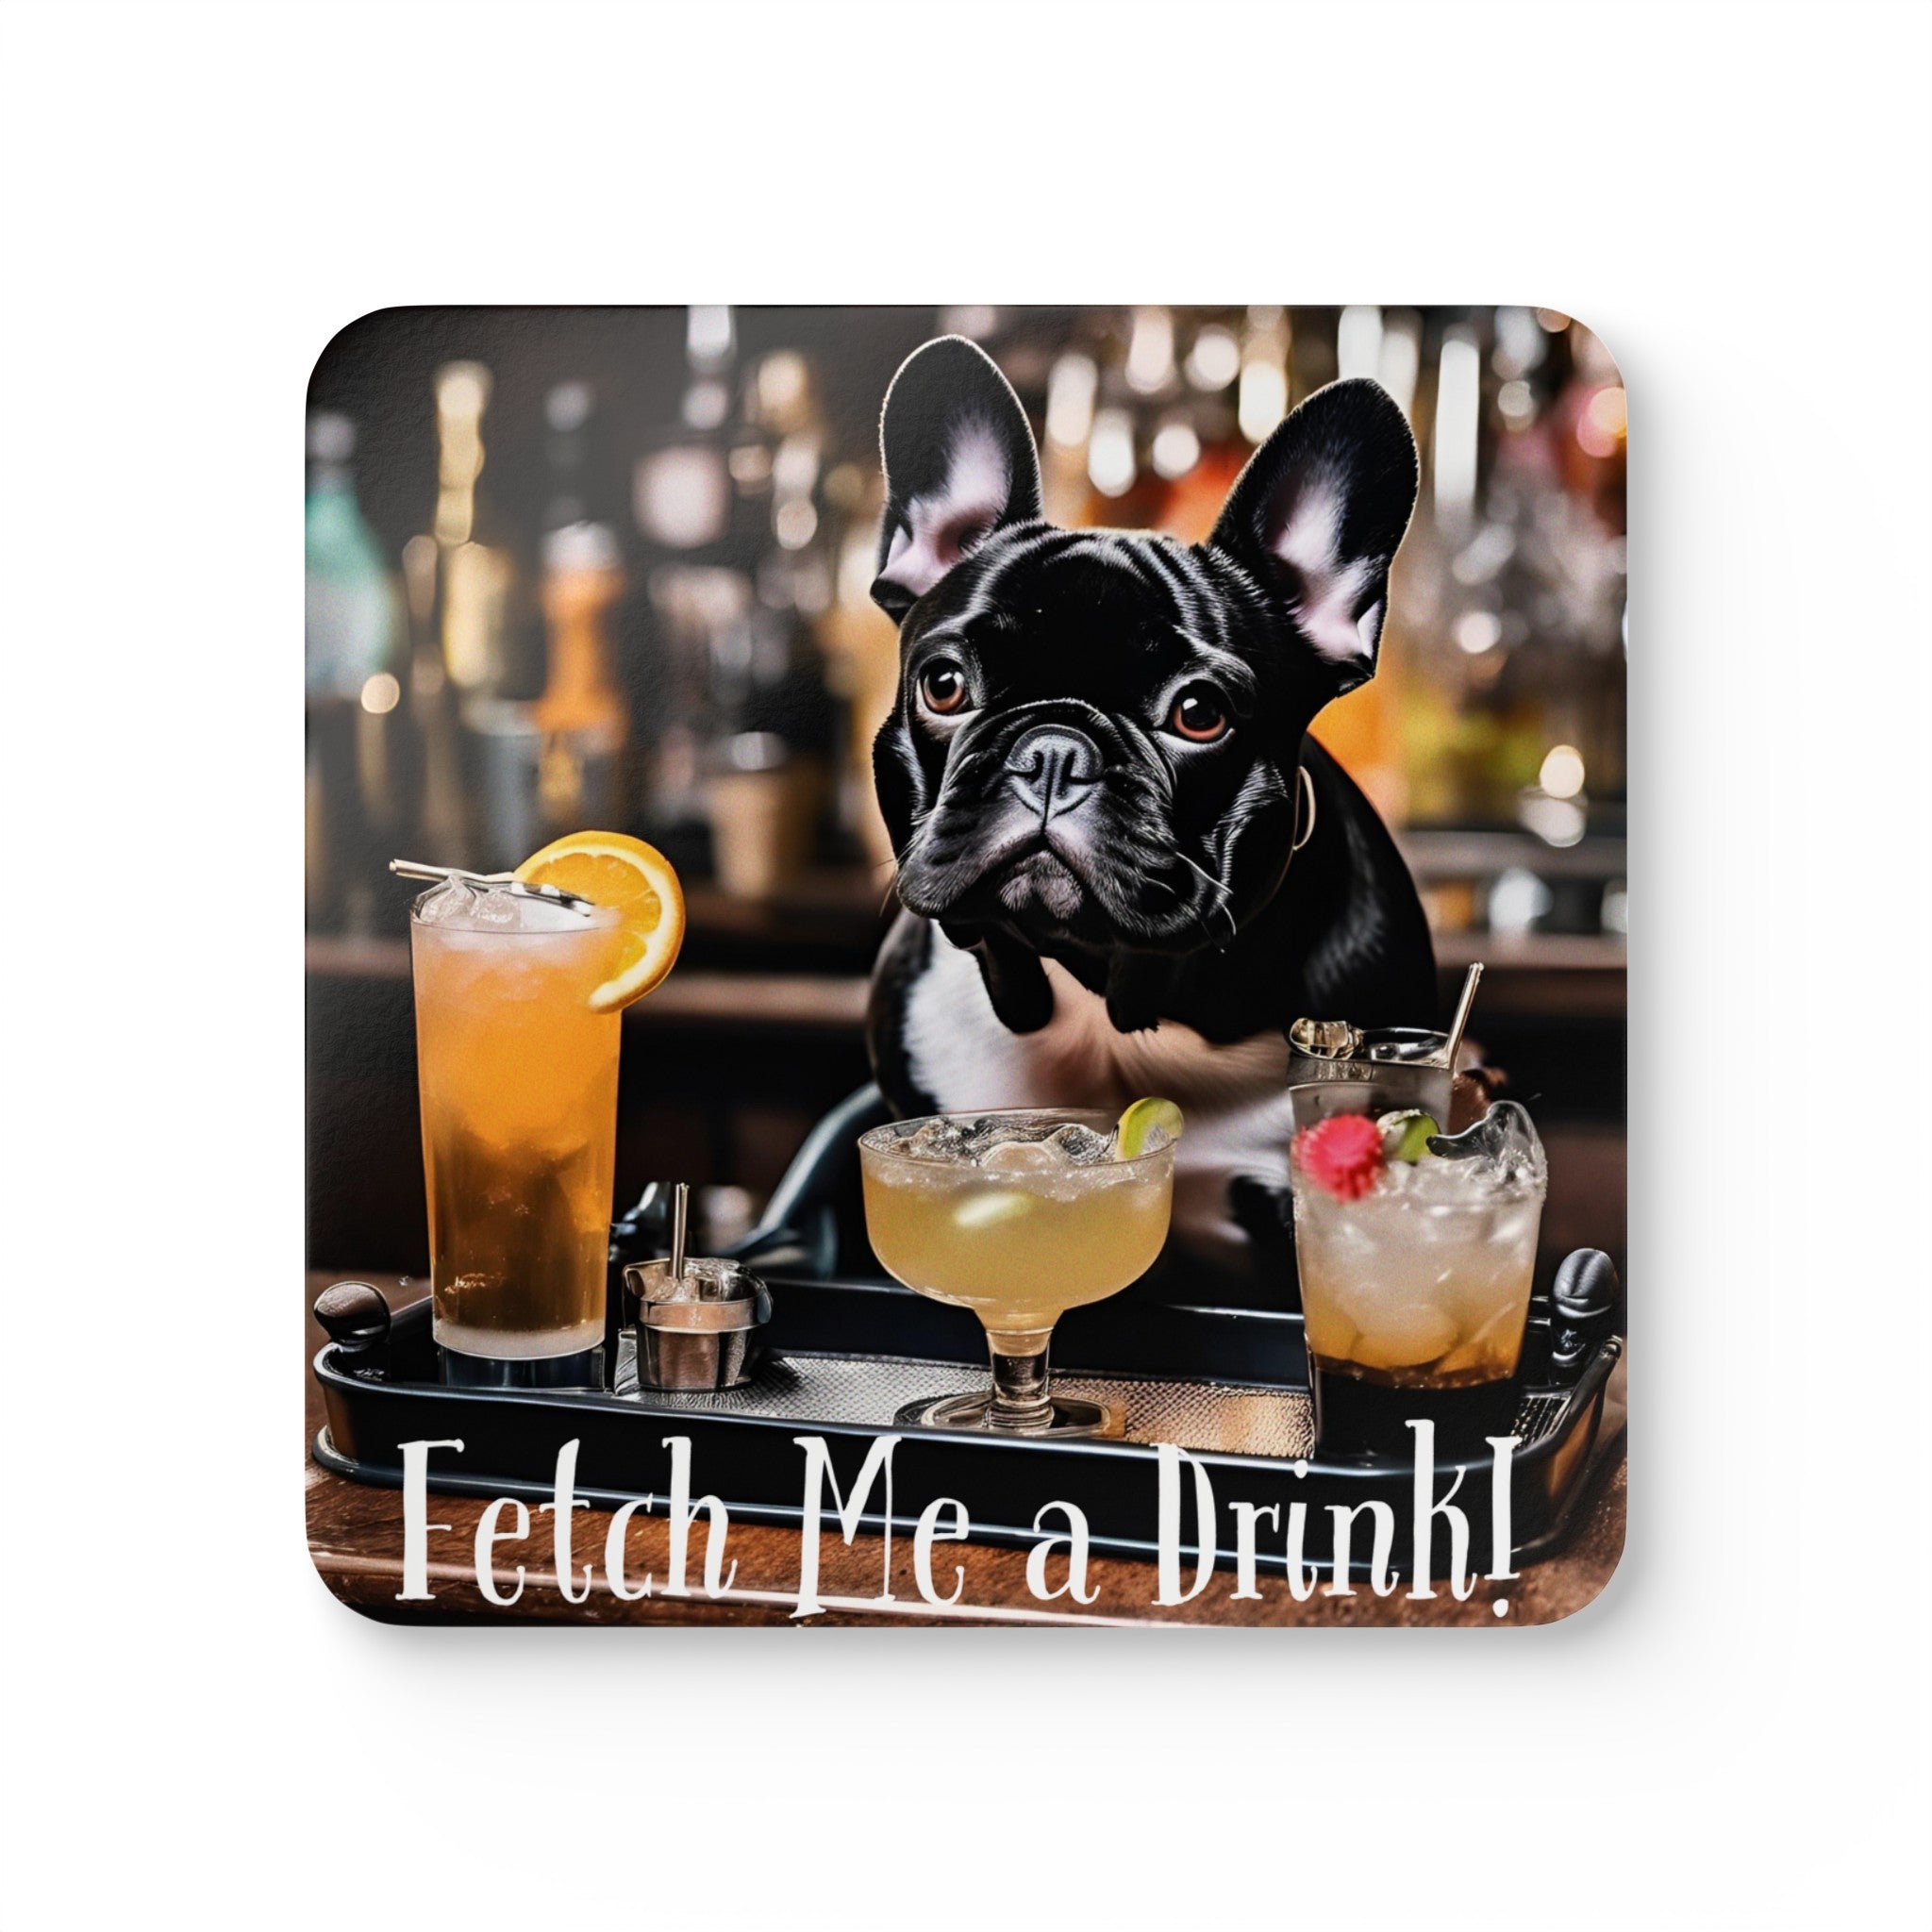 "Fetch Me A Drink" set of 4 coasters (Black/French)